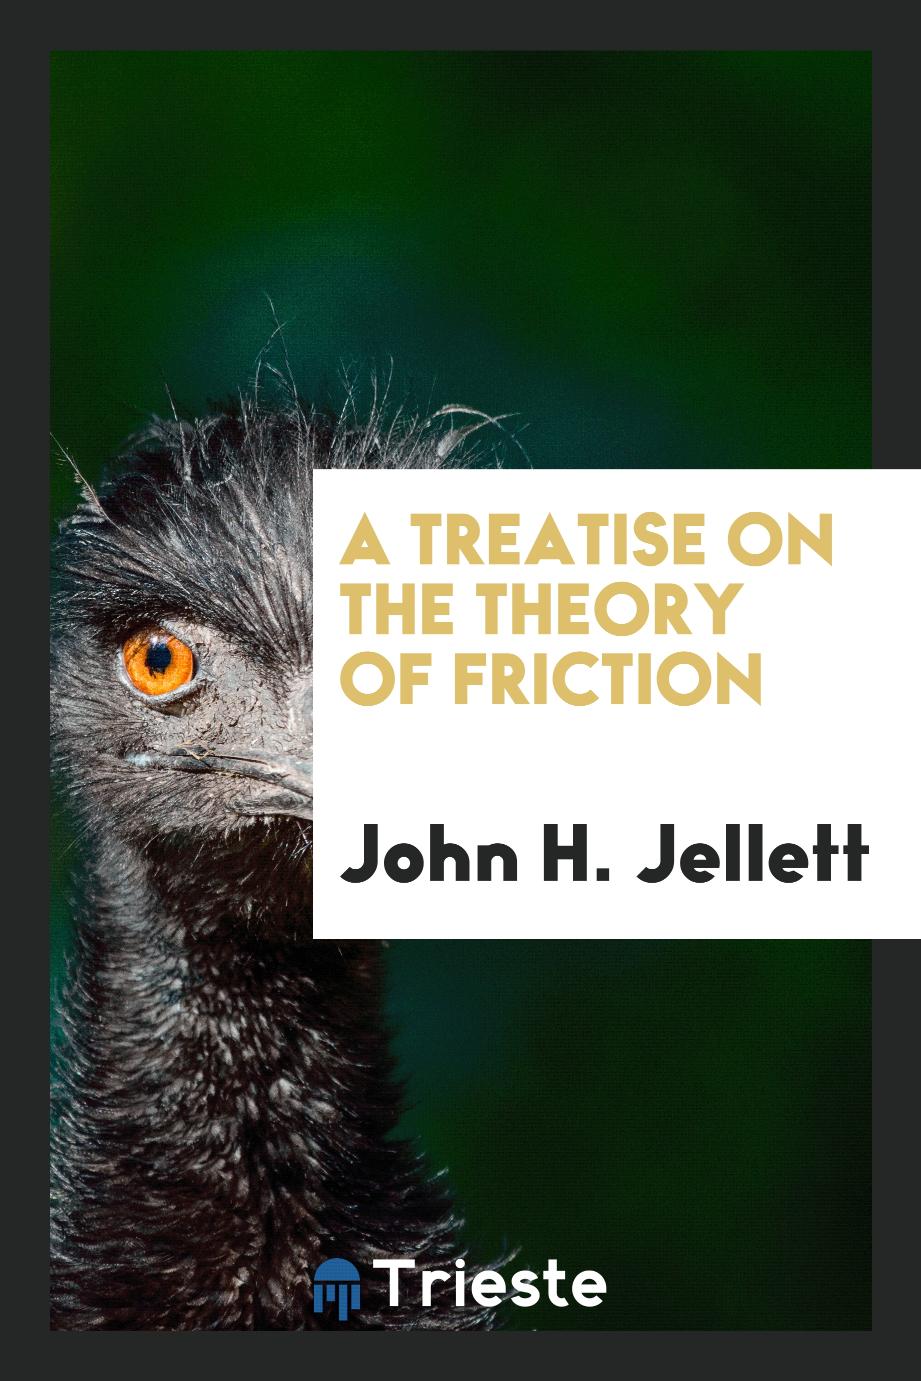 A treatise on the theory of friction